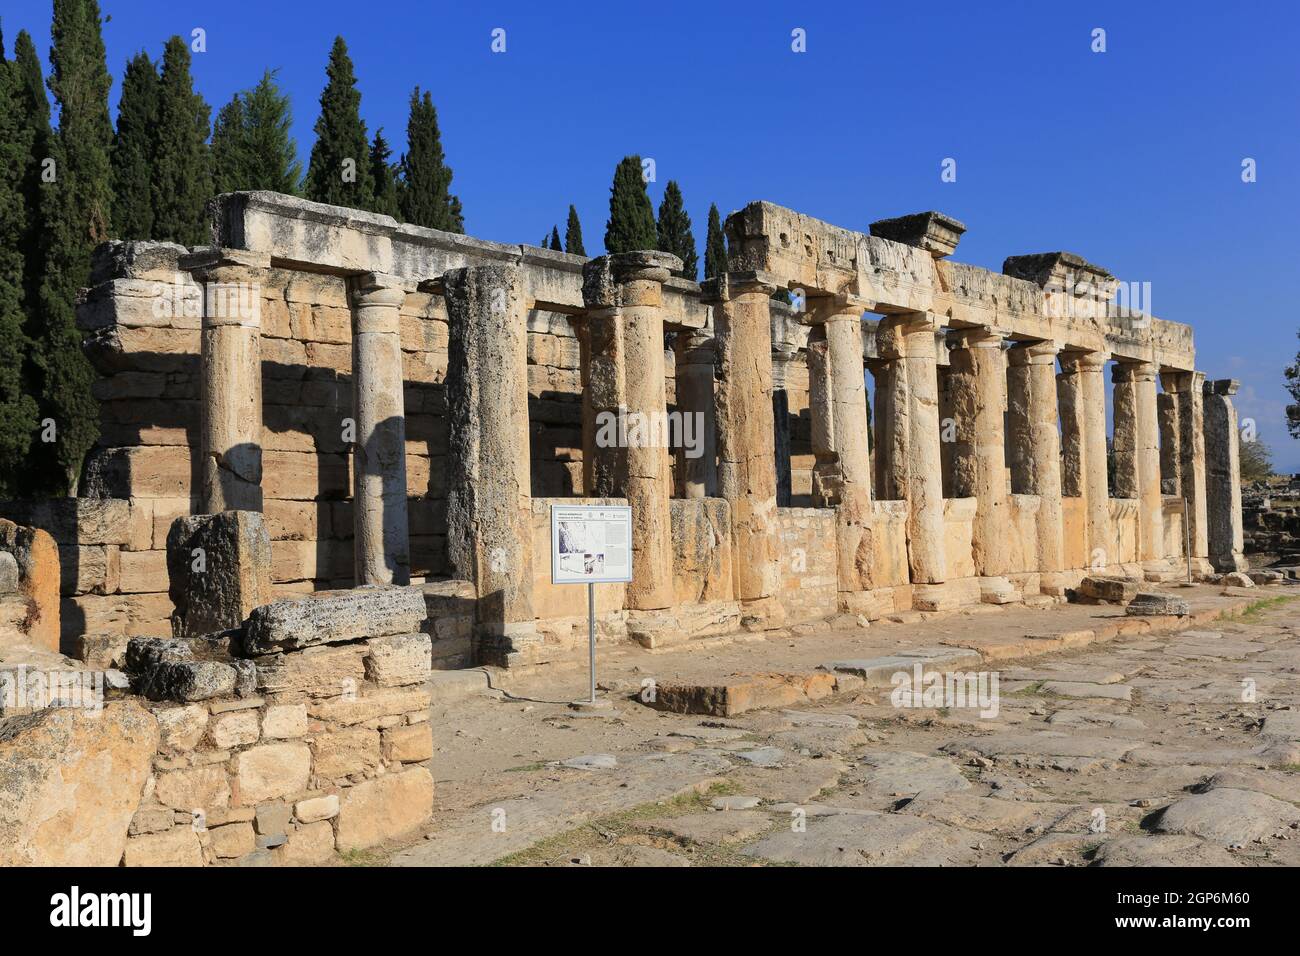 The latrine at the ancient spa city of Hierapolis dates from 190 BC and are near the travertine terraces of Pamukkale in Western Turkey. Stock Photo